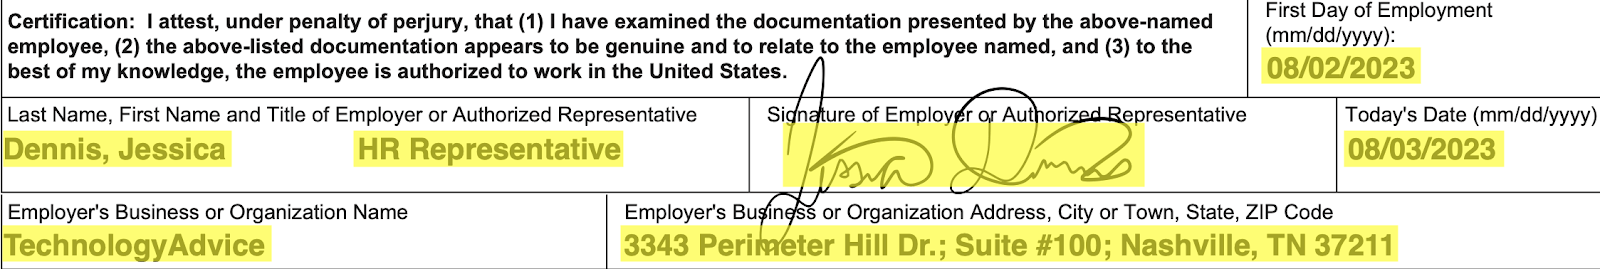 Form I-9's Section 2 Employer Certification area with fields for the new hire's start date, full name and title of the authorized representative, signature, today's date, and business address completed.